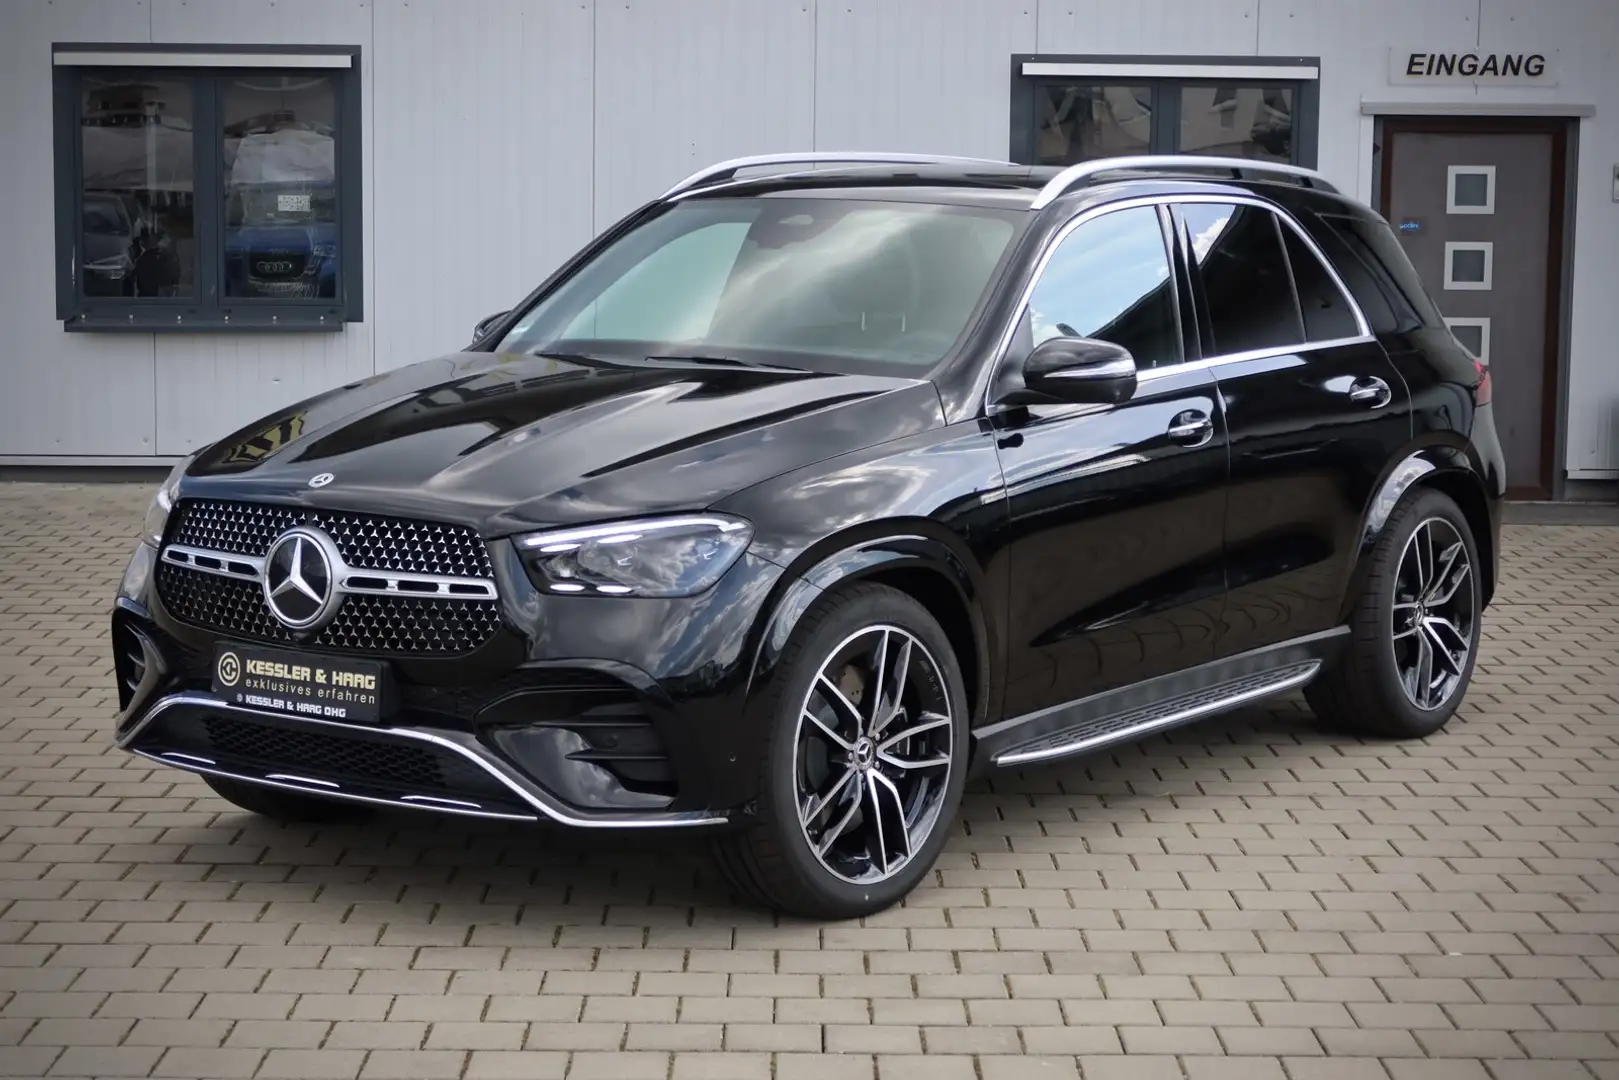 Mercedes-Benz GLE 450 4Matic AMG Line #PANO#AIRMATIC#FACELIFT# Schwarz - 2